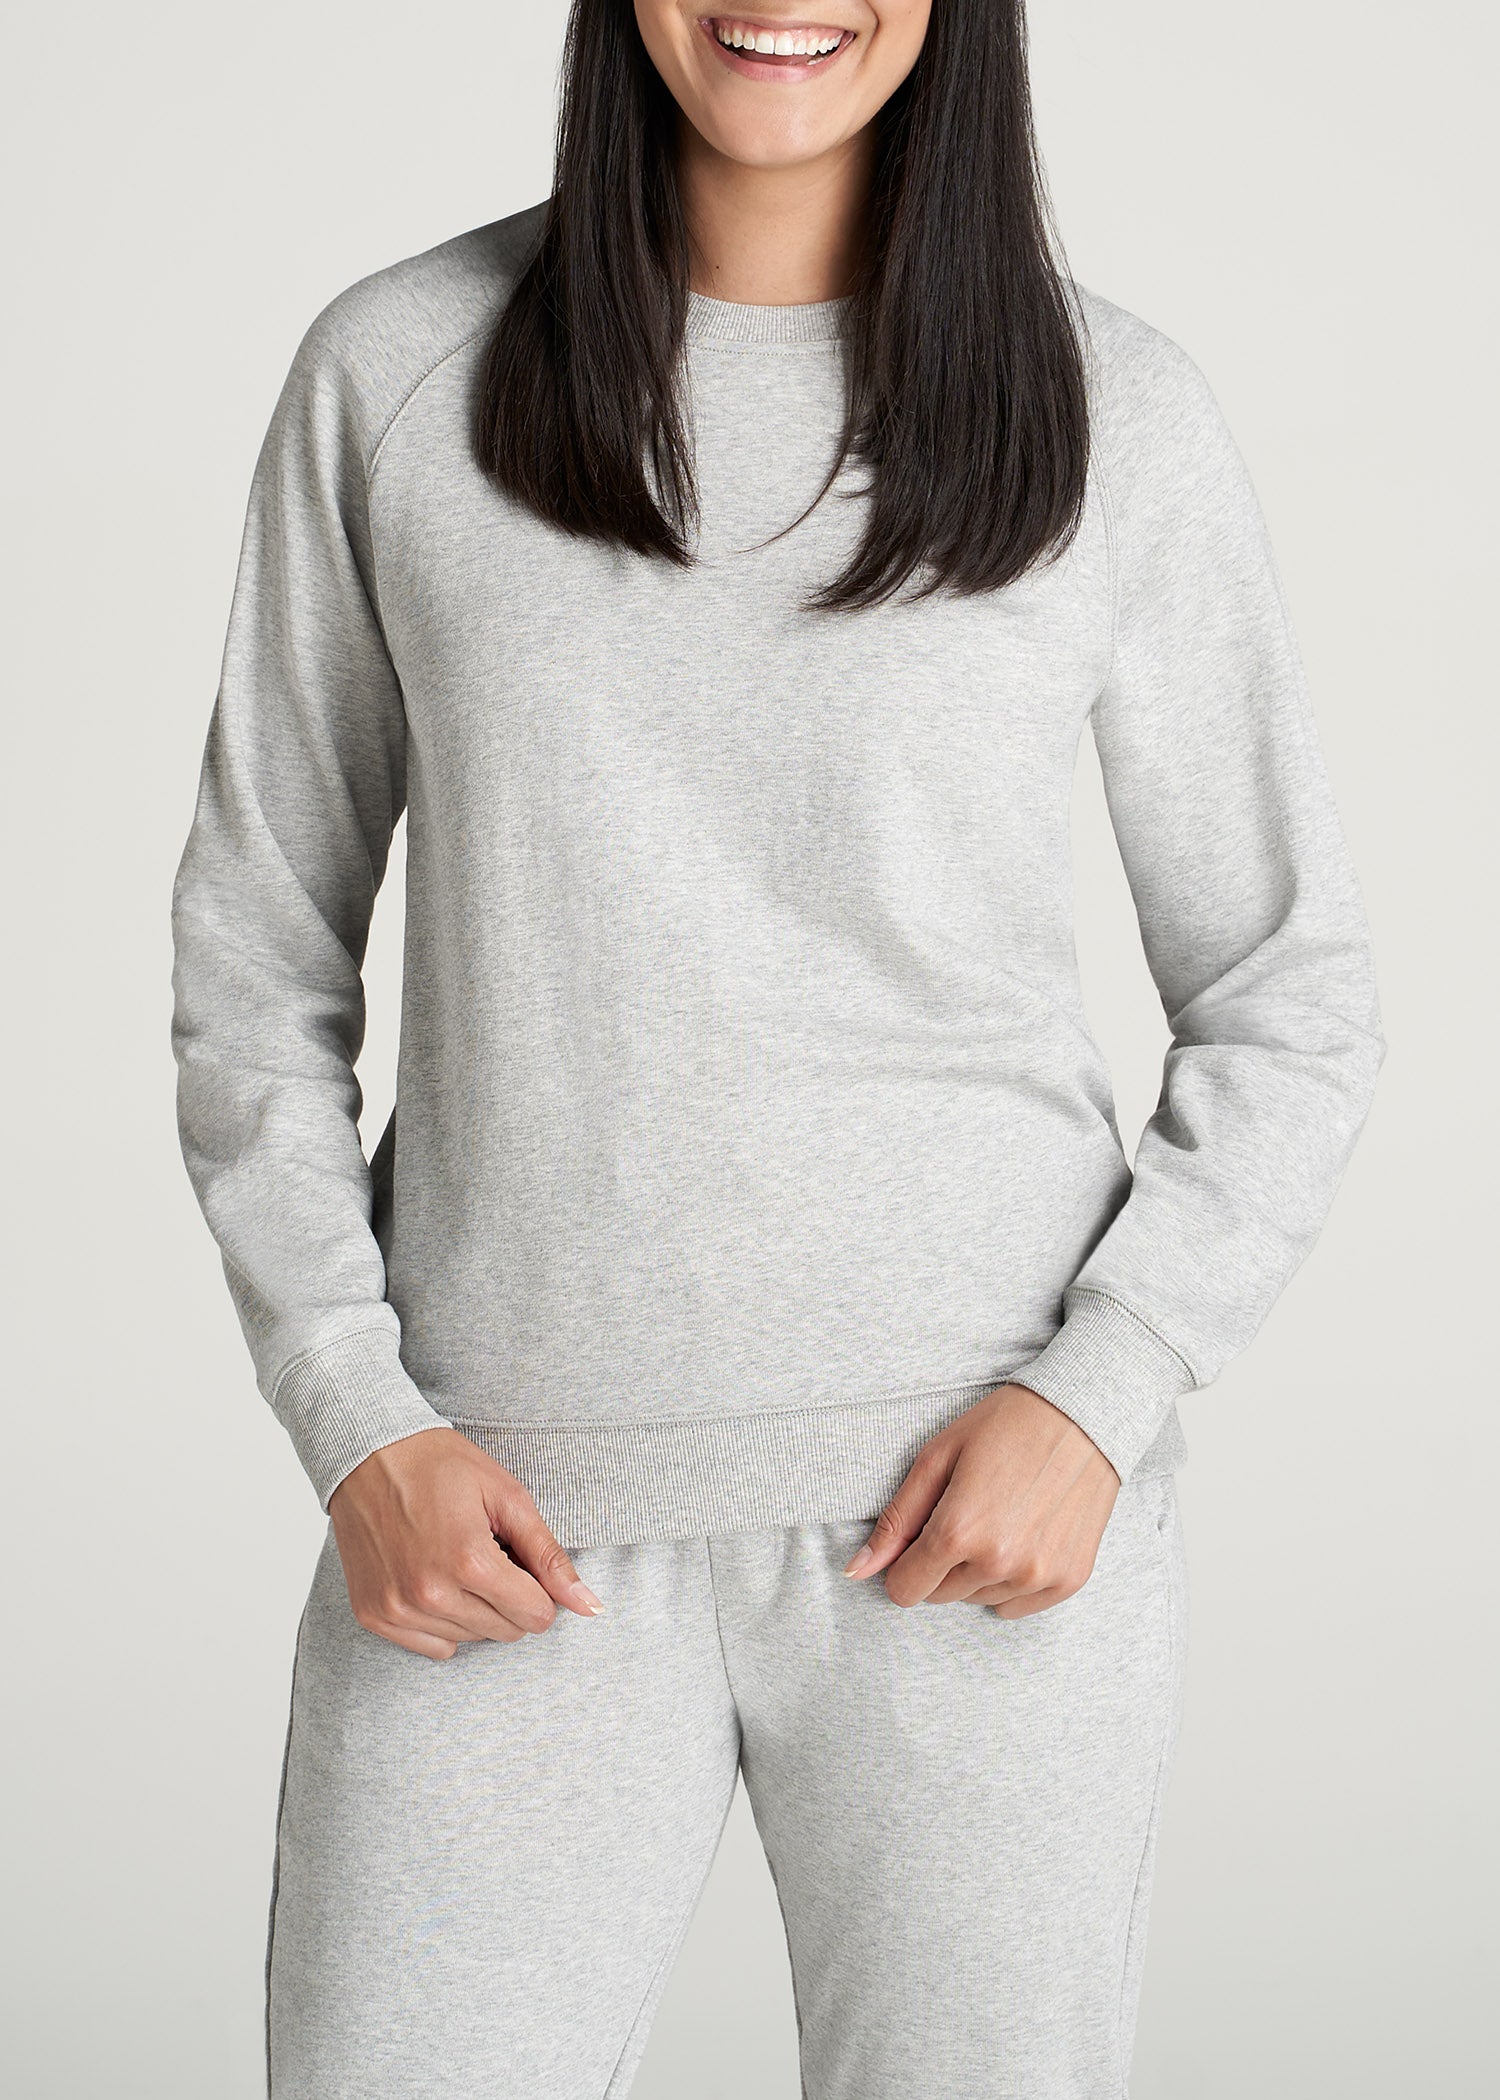 American-Tall-Women-Womens-FrenchTerry-CrewNeck-GreyMix-front